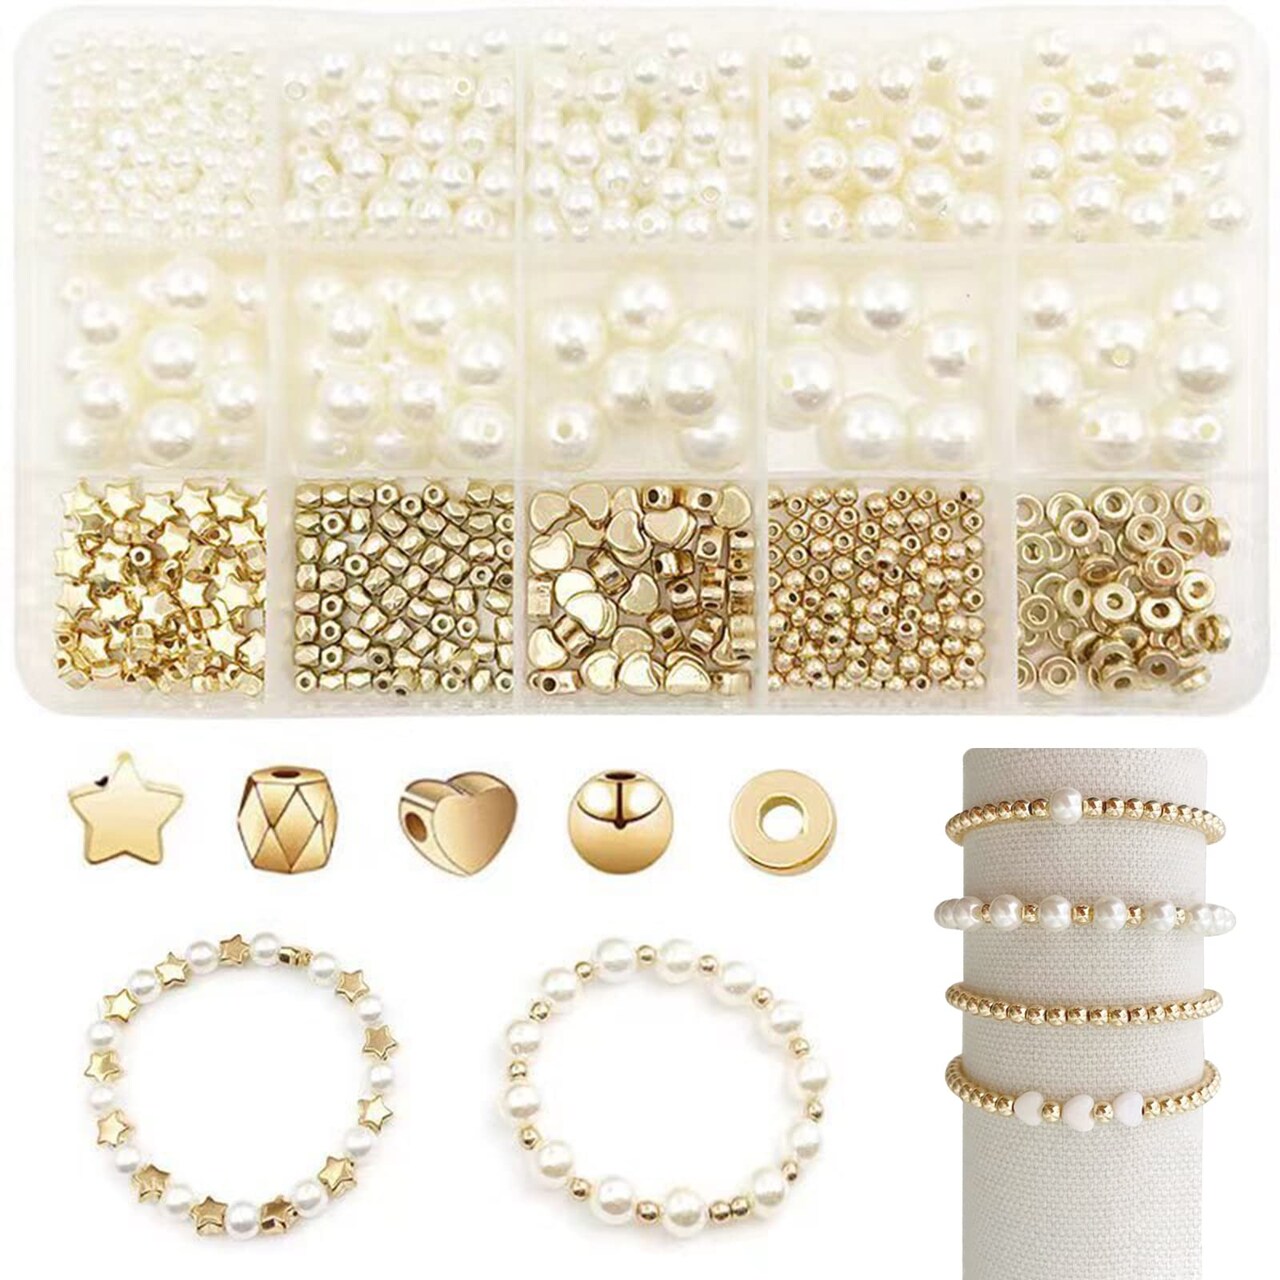 SEMATA 750Pcs Beads for Bracelets Making Kit DIY Pearl Beads for Jewelry  Making Kit for Adults Charms for Bracelets String Crystal Beads for  Bracelets Making Kit for Girls Jewelry Making Supplies